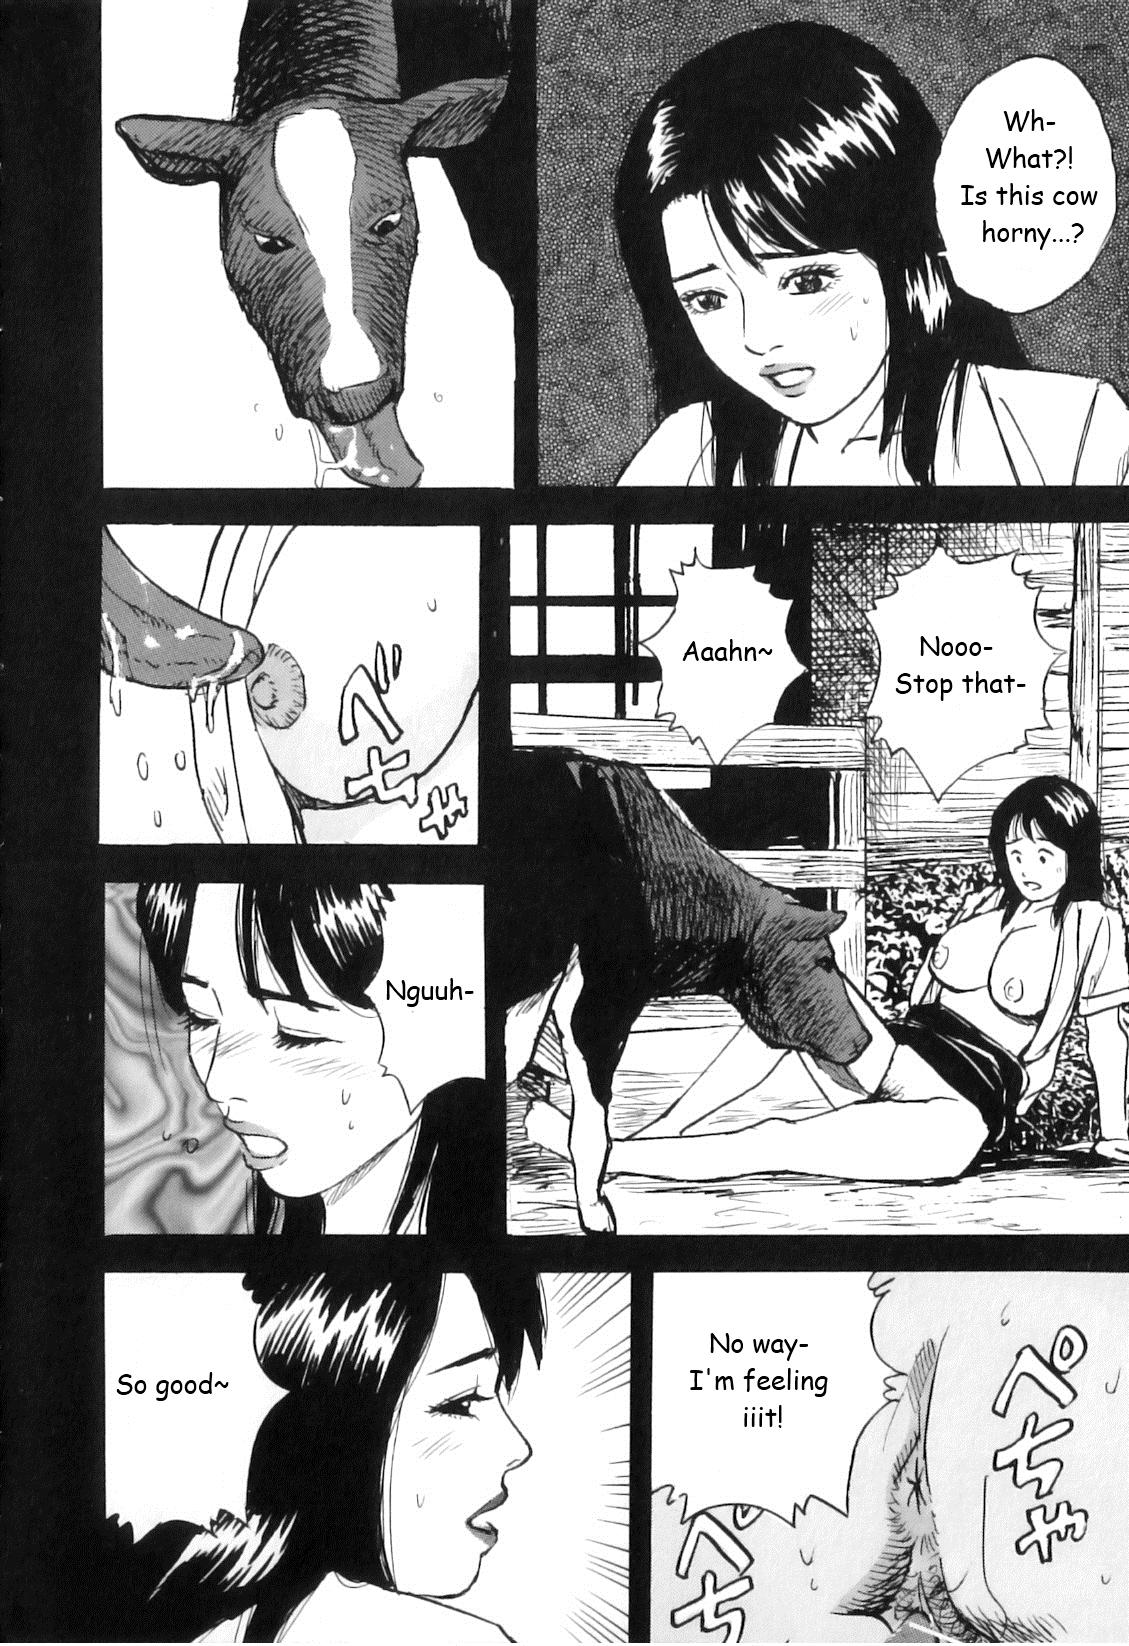 Ushi to Nouka no Yome | The Cow and the Farmer's Wife 8